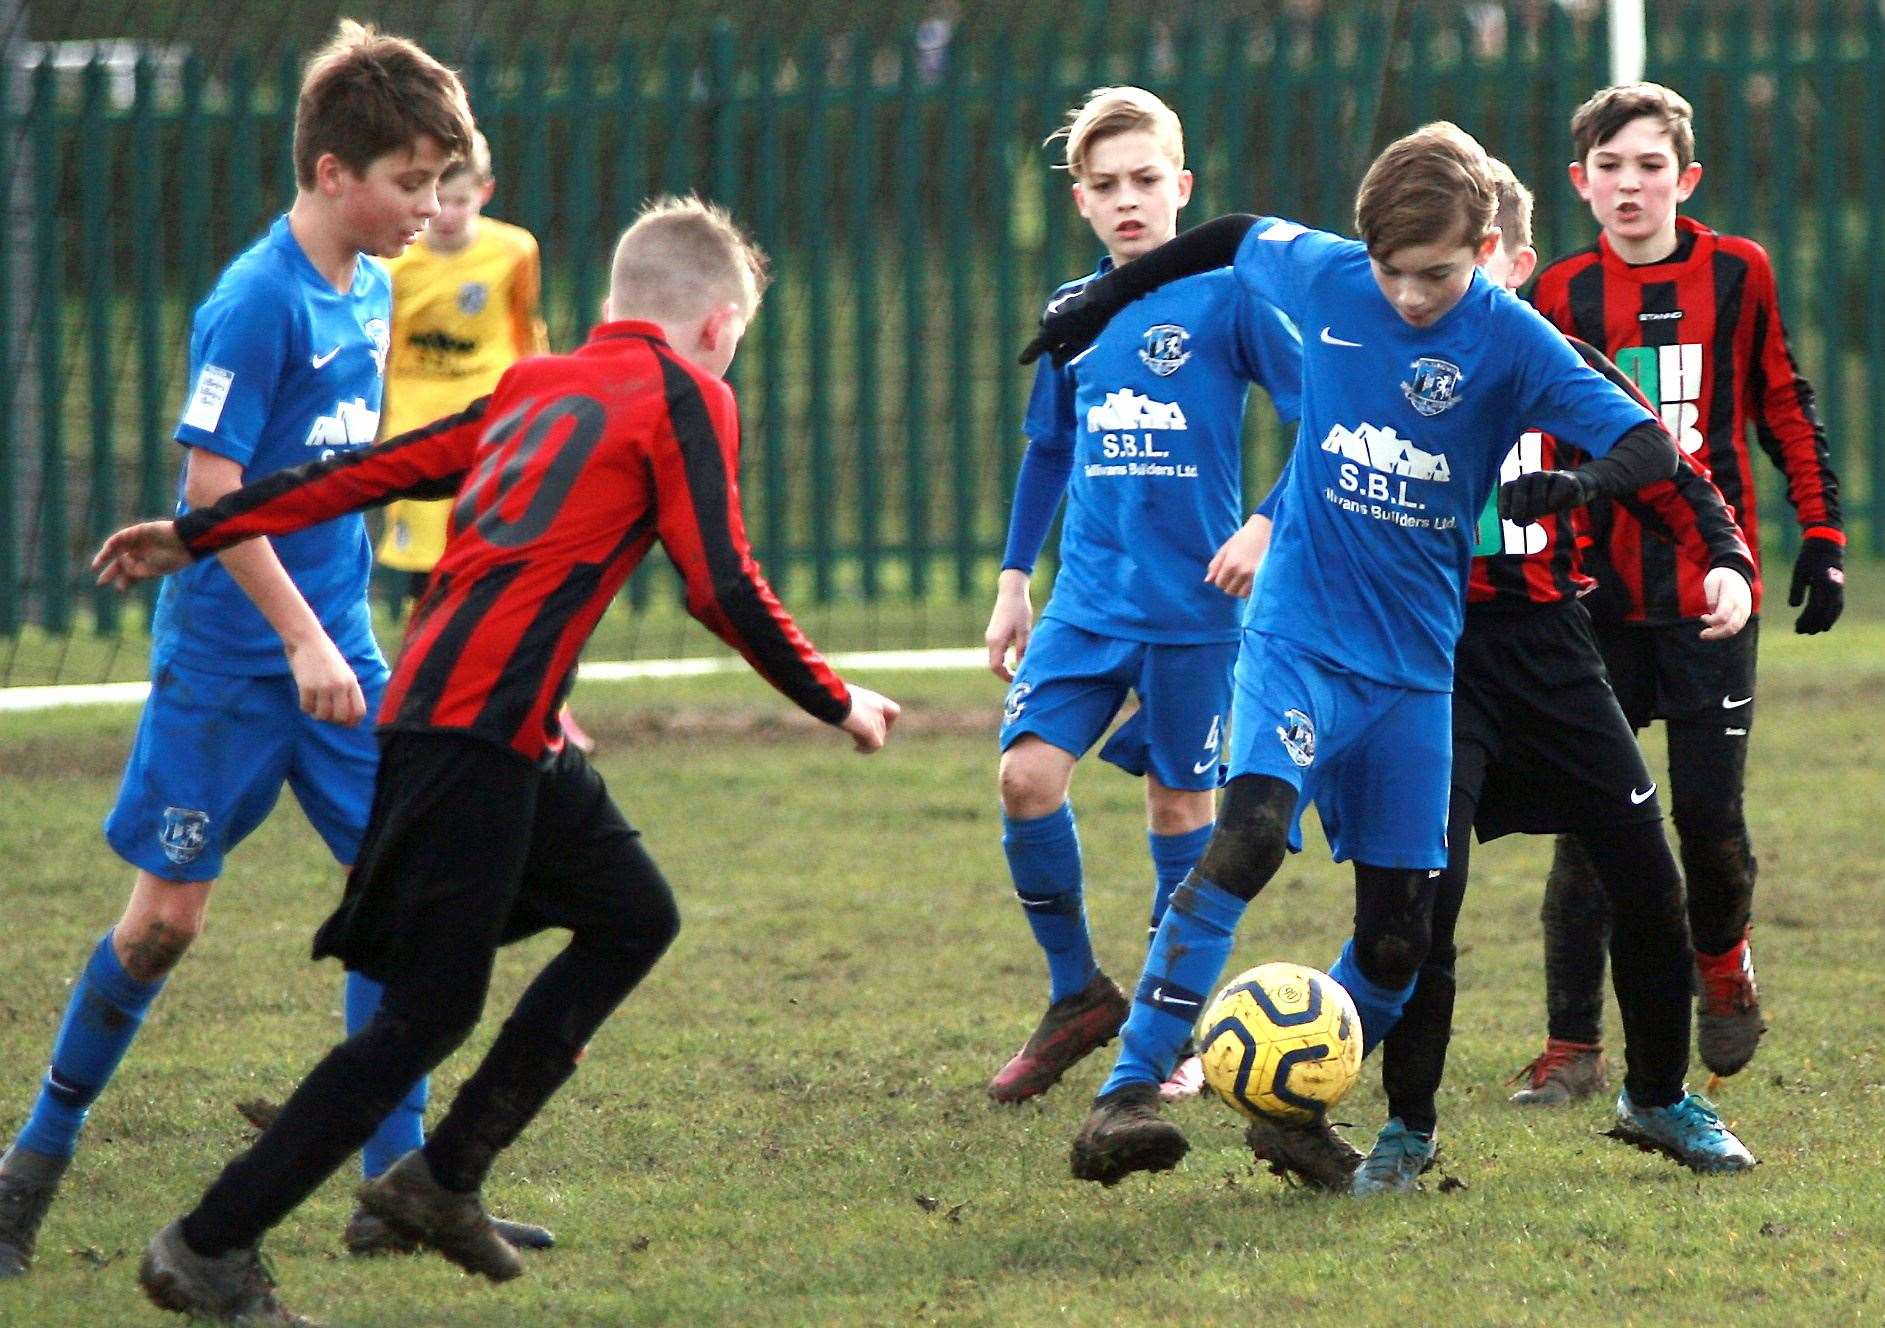 Medway United West under-12s (blue) are closed down by Woodcoombe Youth under-12s. Picture: Phil Lee FM28210271